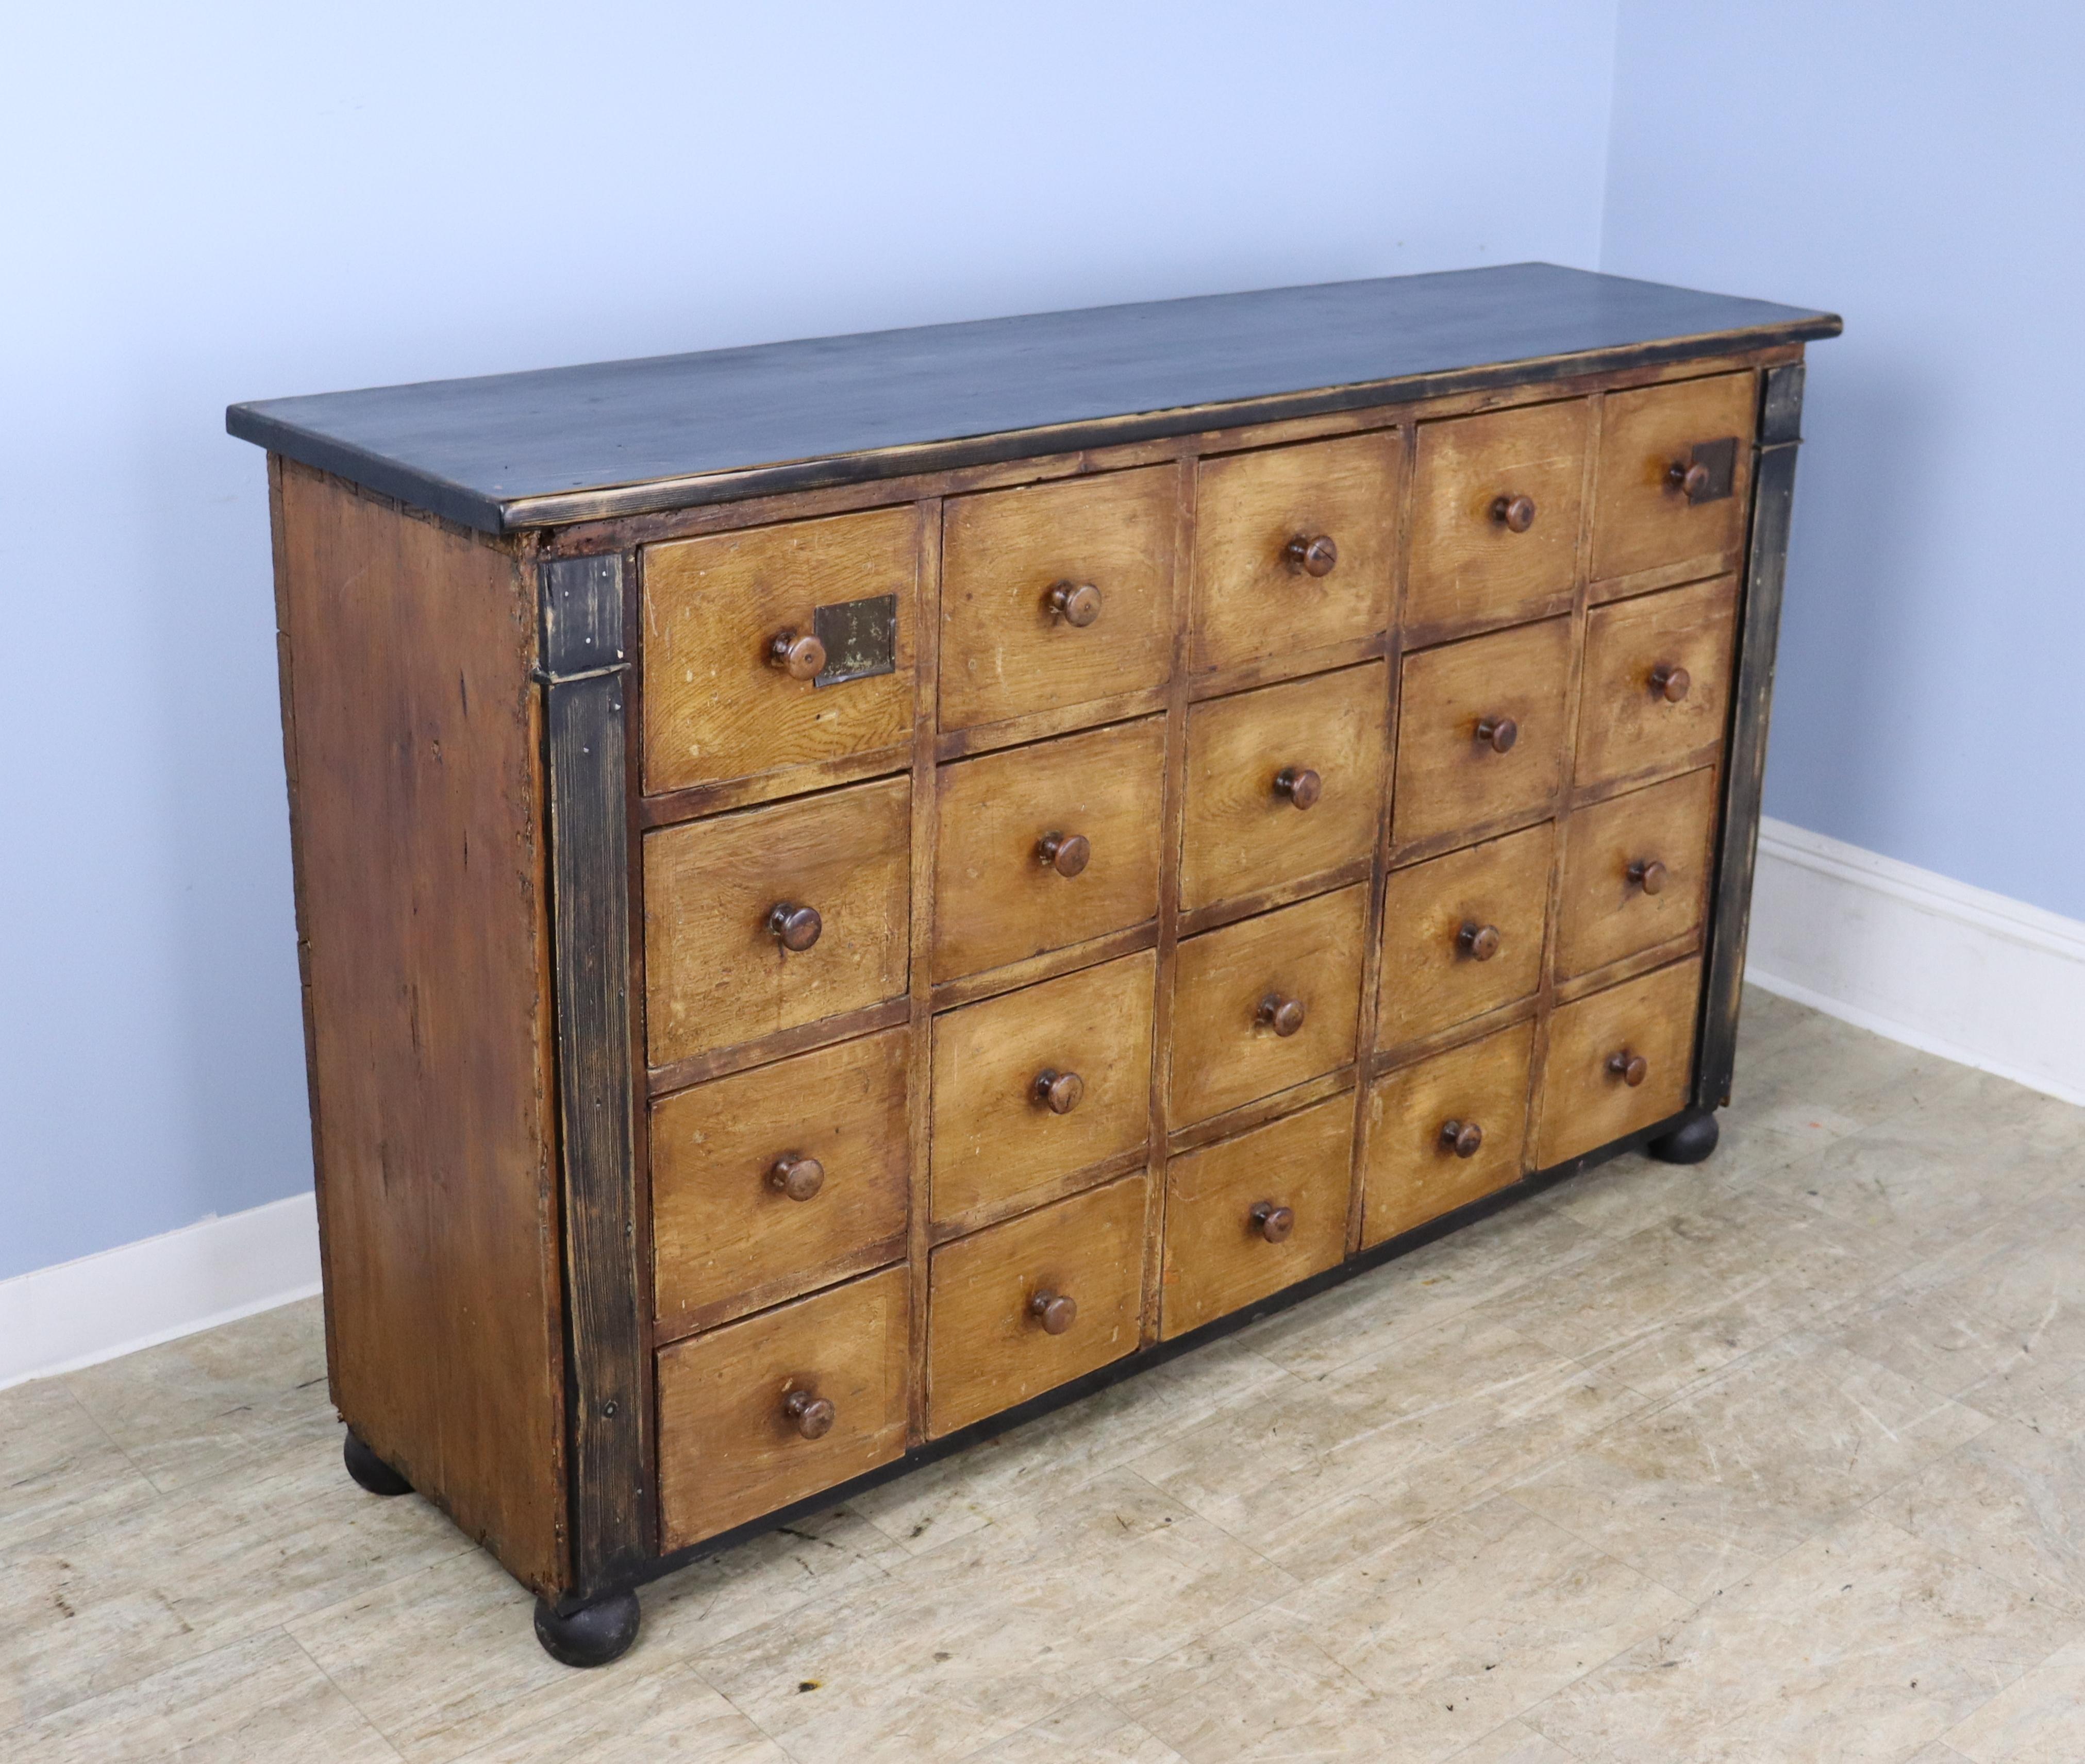 An imposing flight of 20 drawers, just the right depth and length to act as an interesting storage and case piece. The top is new and faux distressed. The paint on the drawers is original, and there are remnants of the old colored powders that were